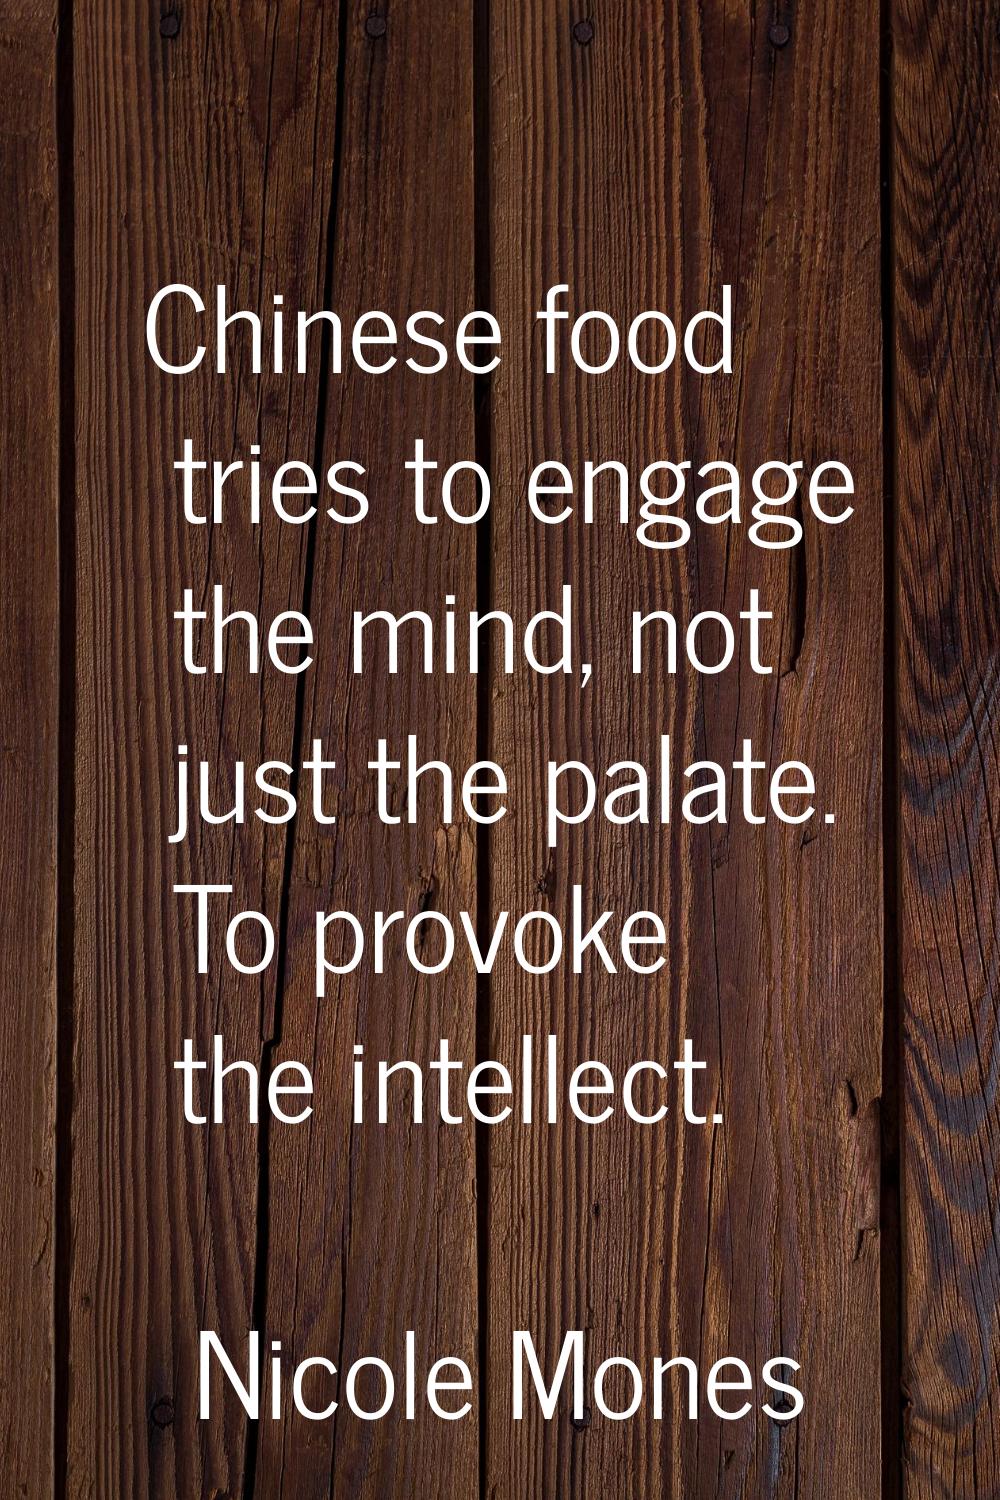 Chinese food tries to engage the mind, not just the palate. To provoke the intellect.